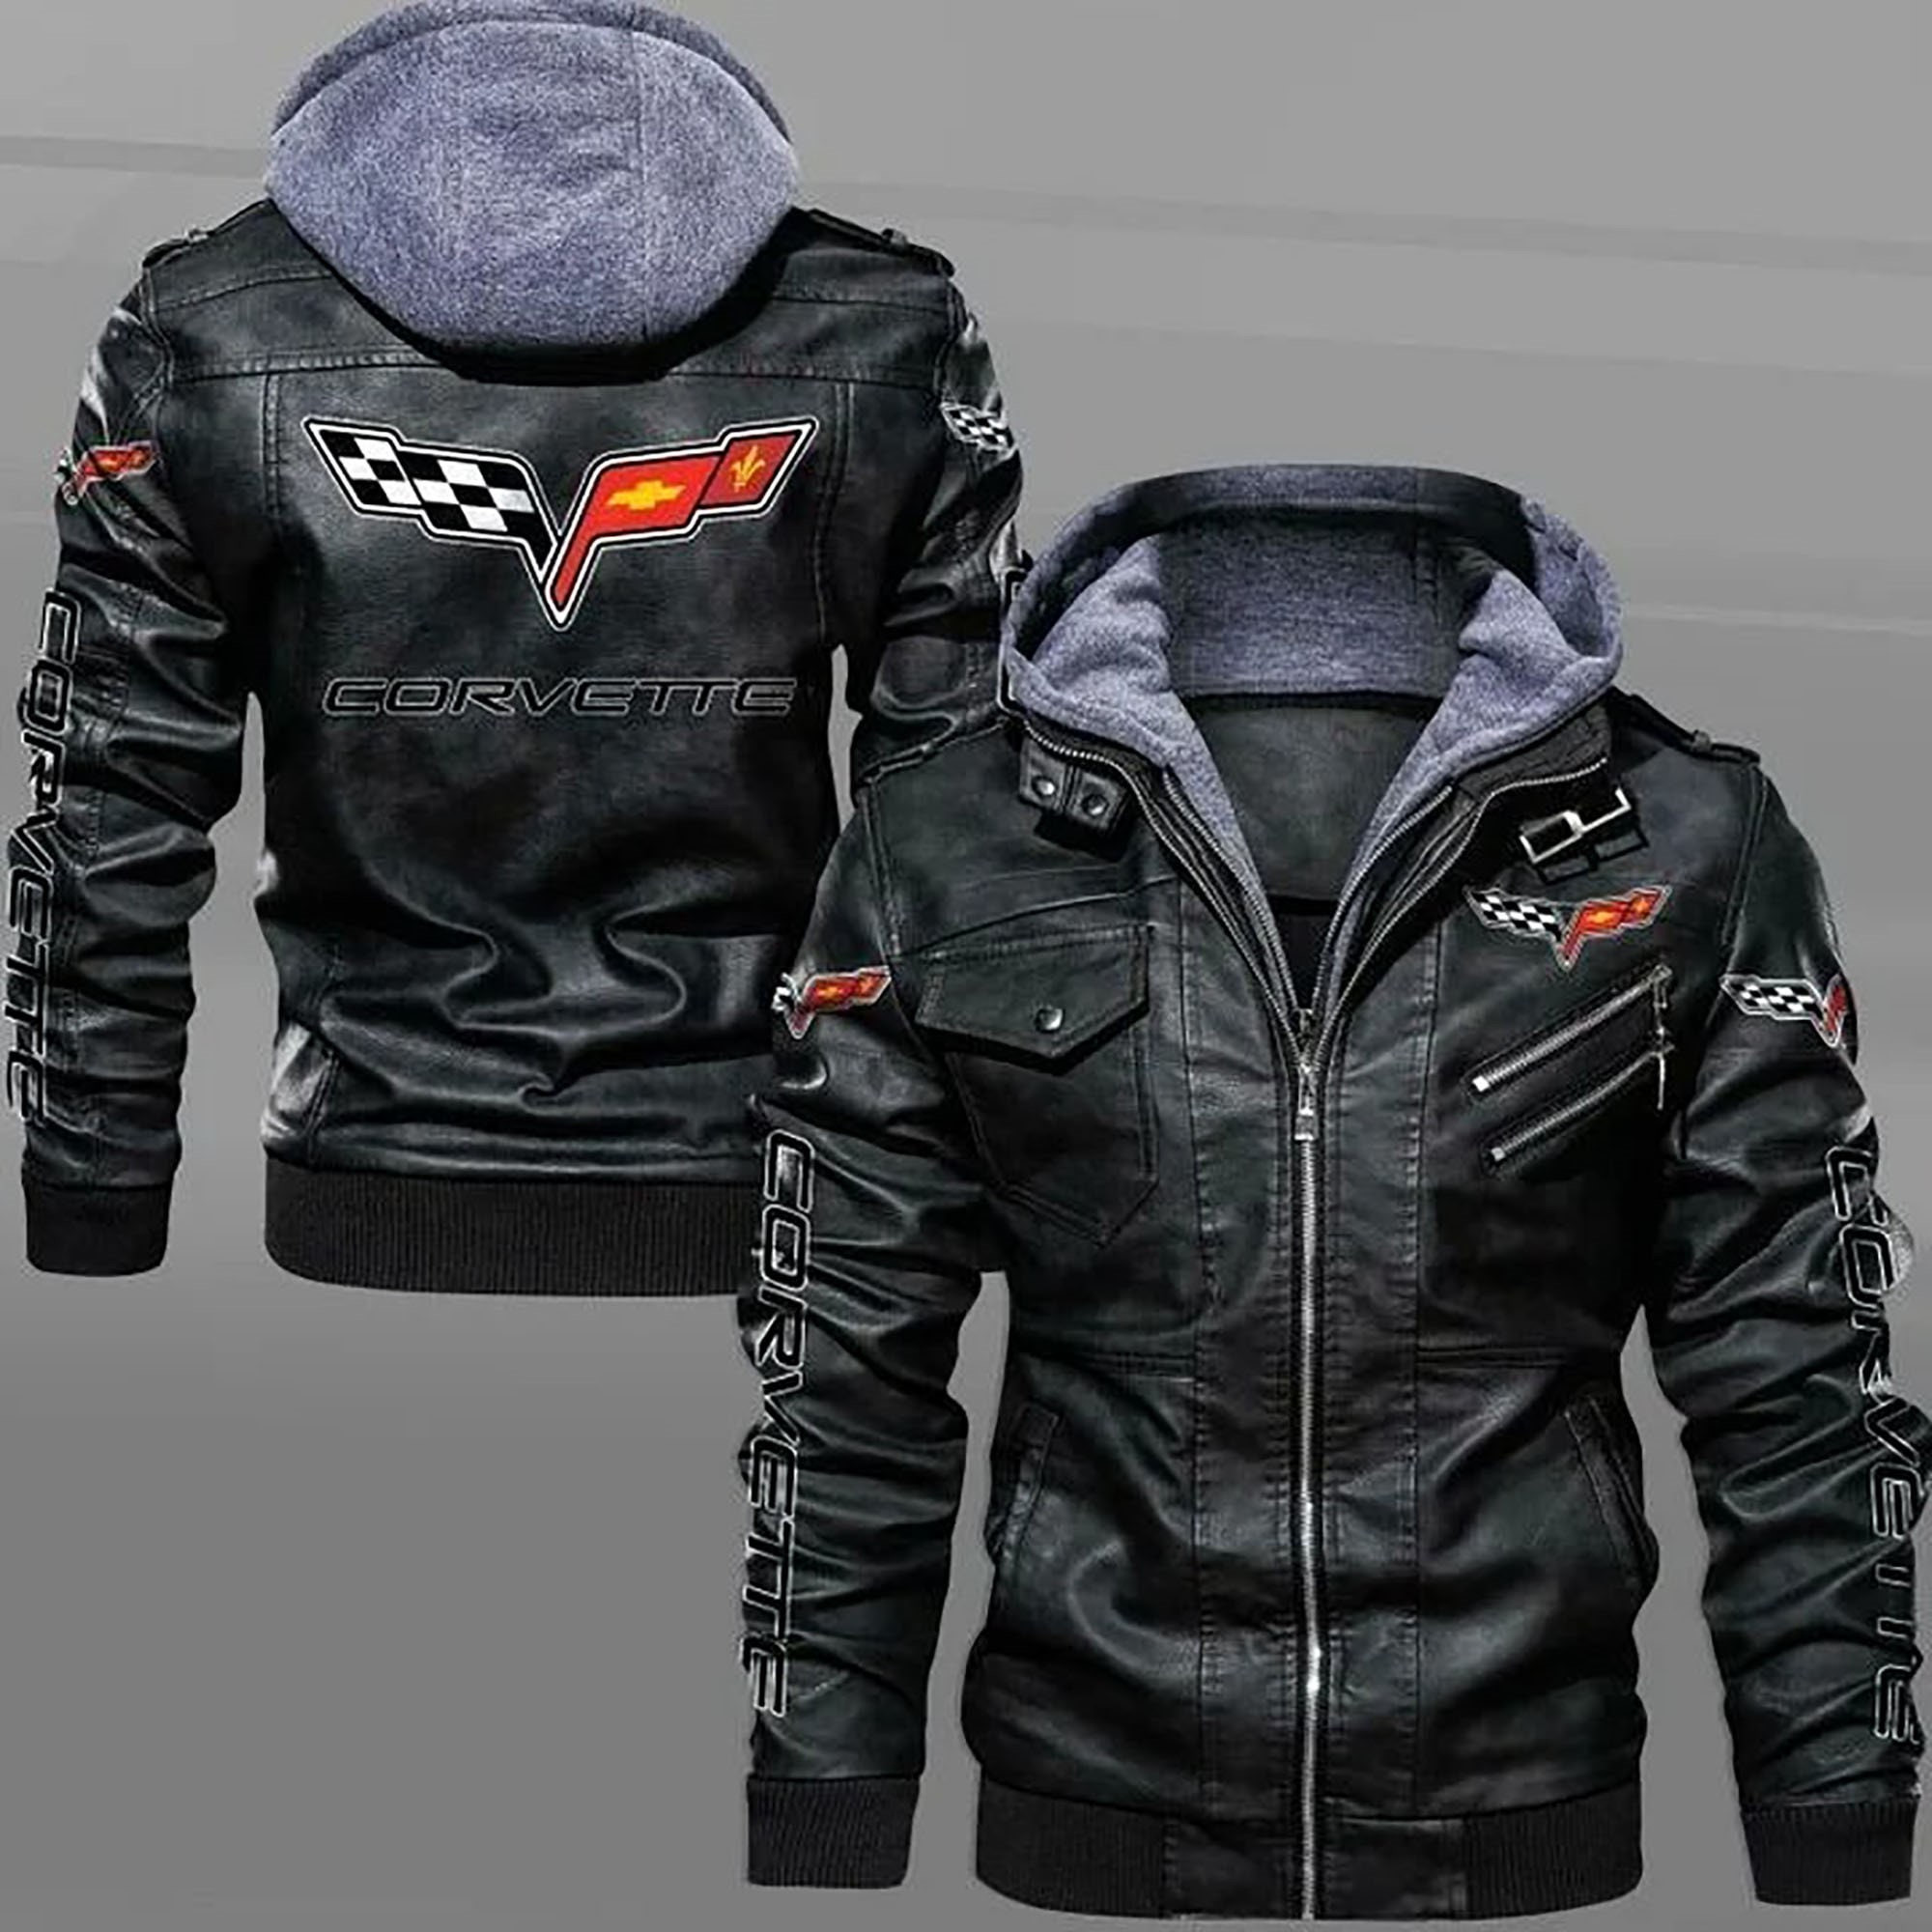 Searching for a new jacket to add to your wardrobe 425